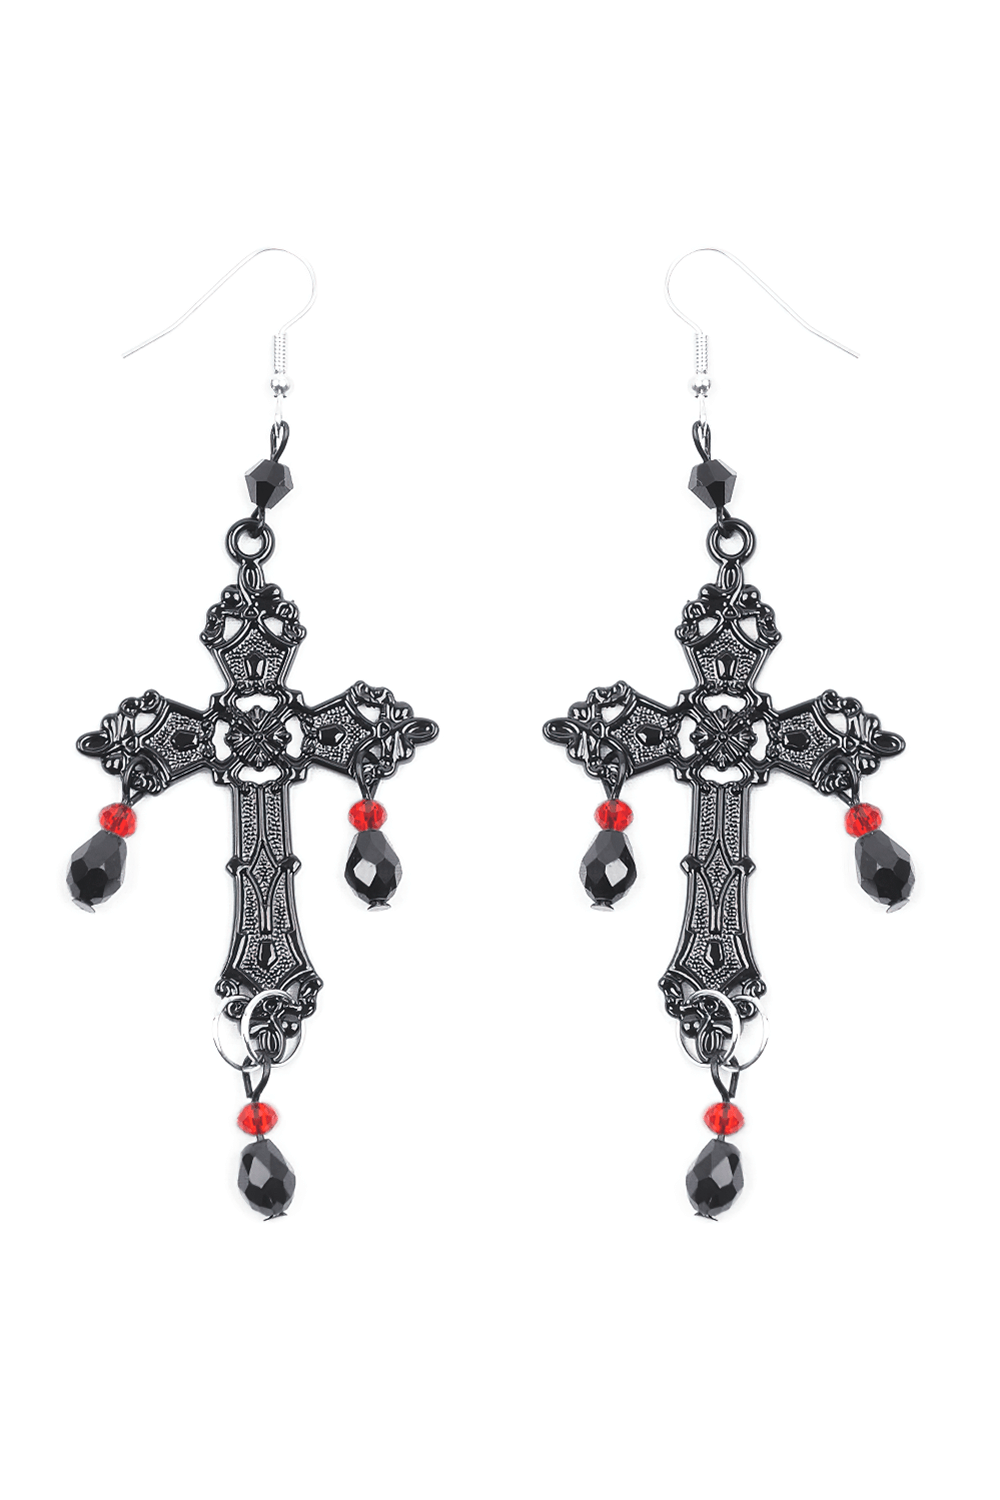 Gothic Cross Earrings with Black and Red Beads